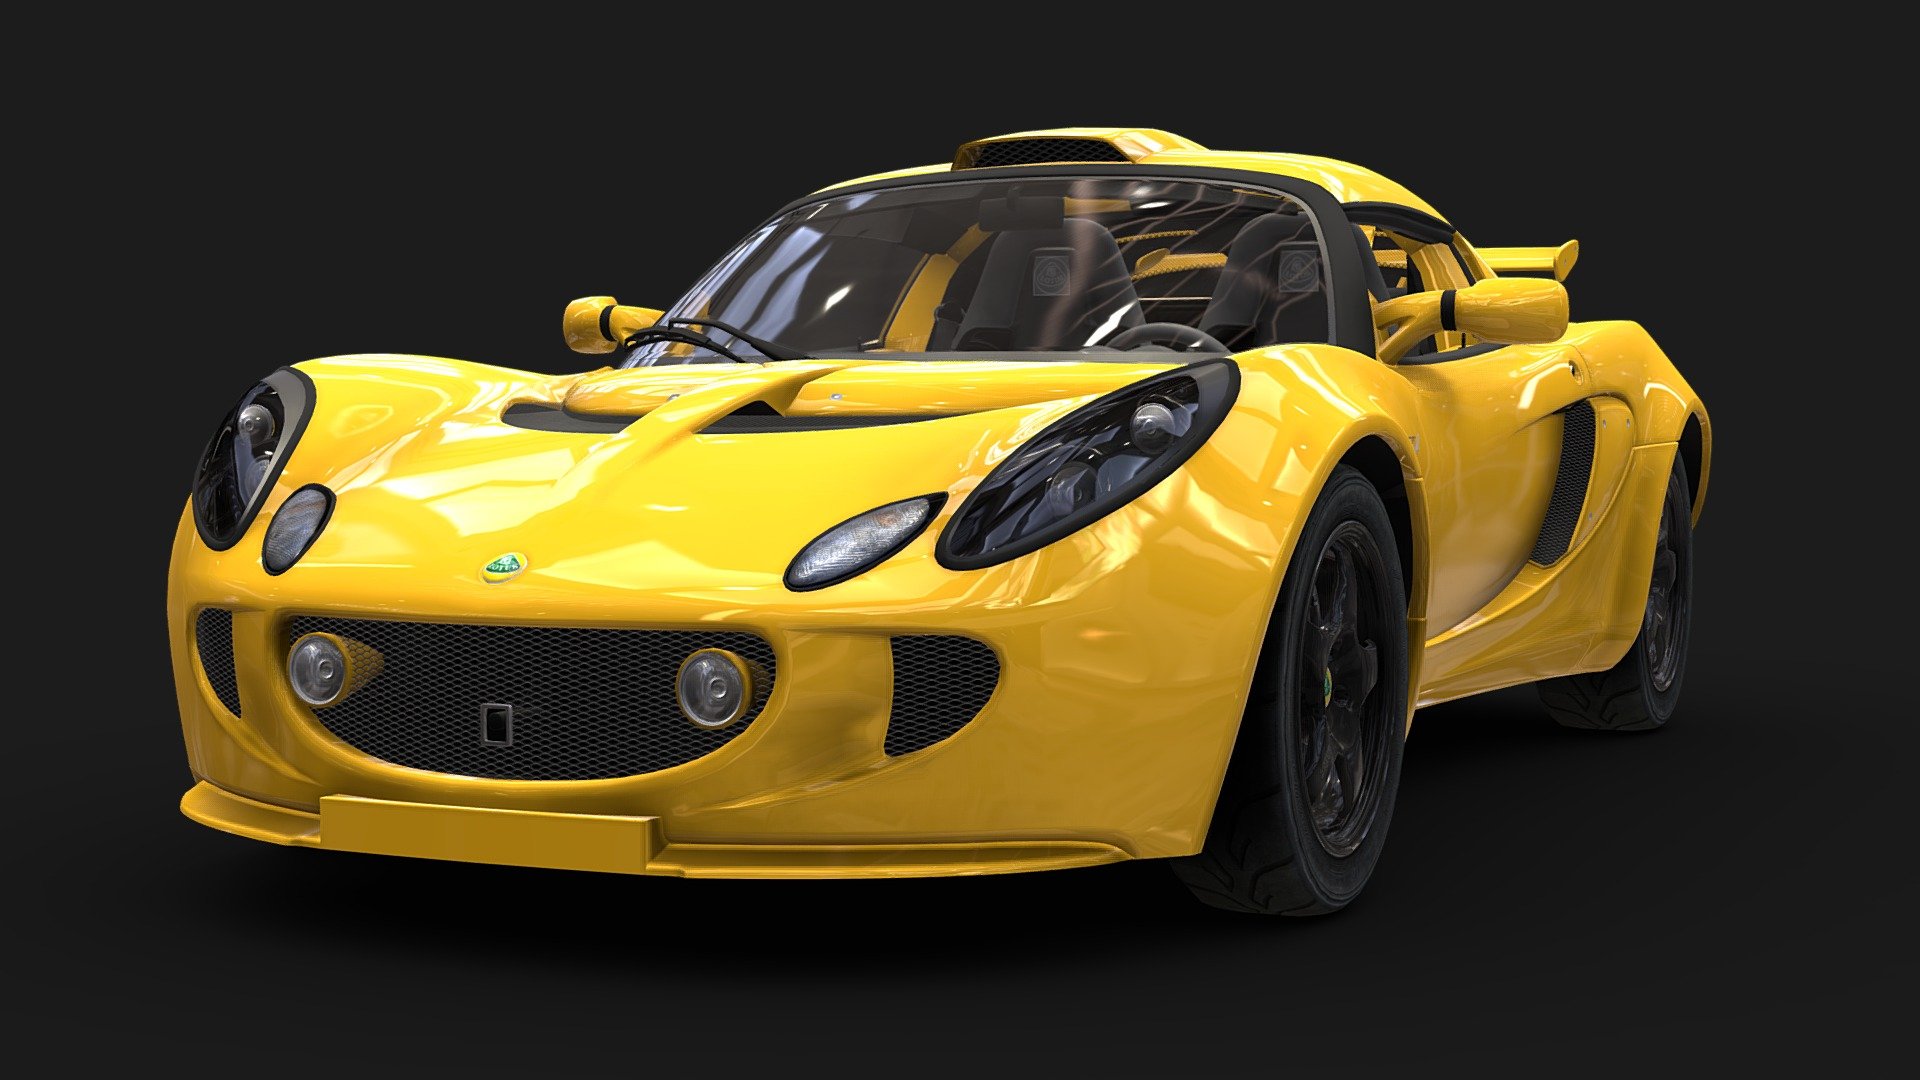 Lotus Exige 240 3d model
FREE
Model From Asseto Corsa
game ready
Original
Contains textures
 - AC - Lotus Exige 240 - Download Free 3D model by DAVID.3D.ART (@david3dart) 3d model